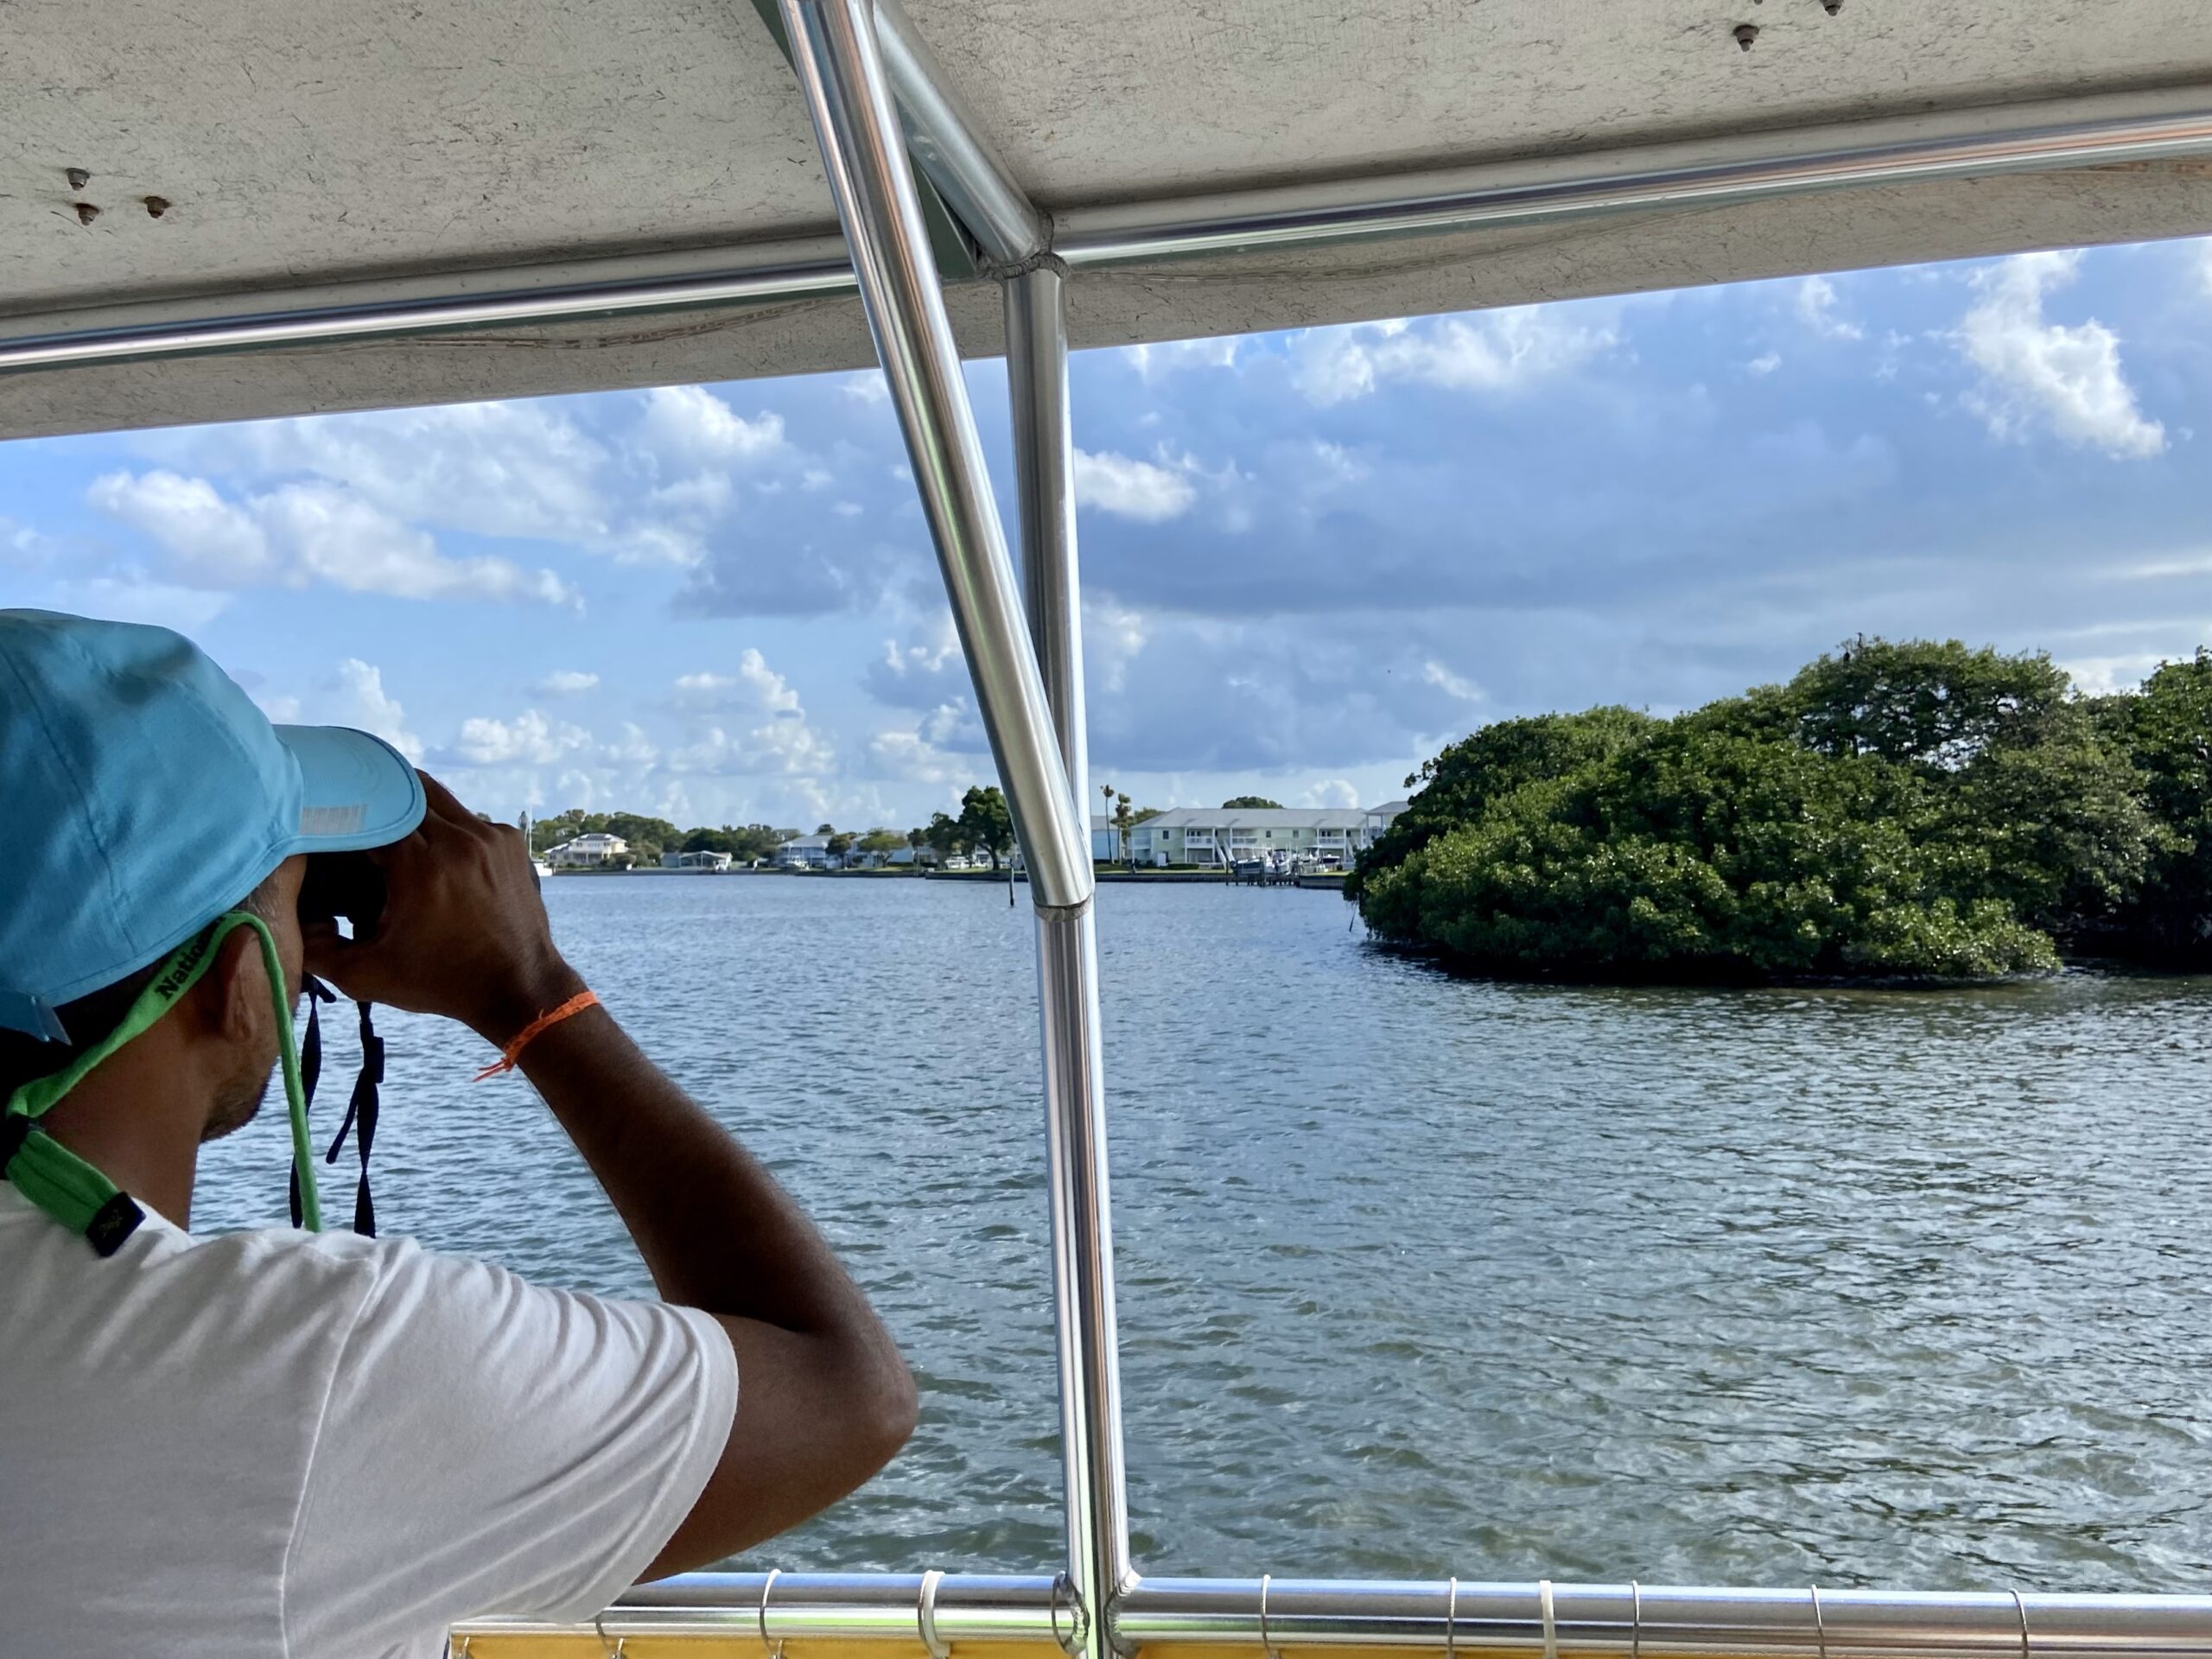 A person on a boat looks out on the water through a pair of binoculars.